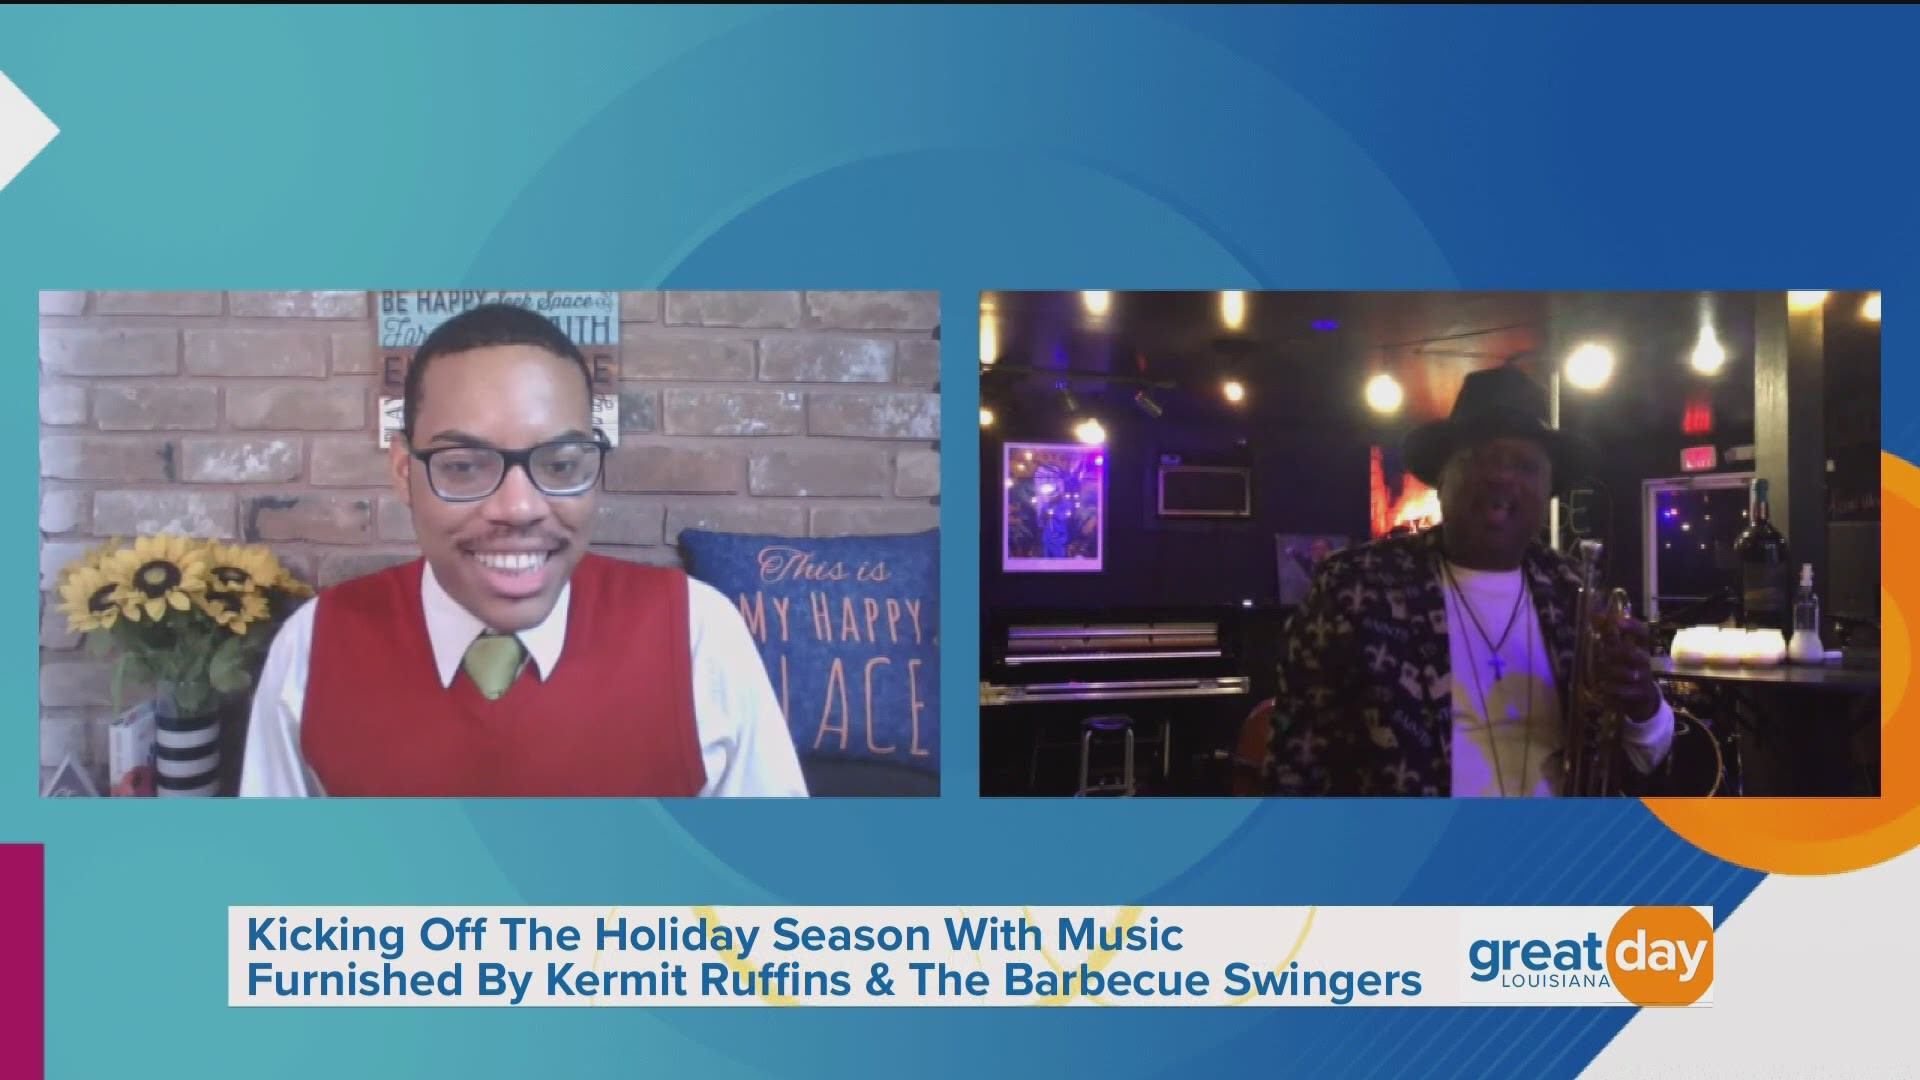 Kermit Ruffins & The Barbecue Swingers discussed the Mother-in-Law Lounge and performed a holiday classic.